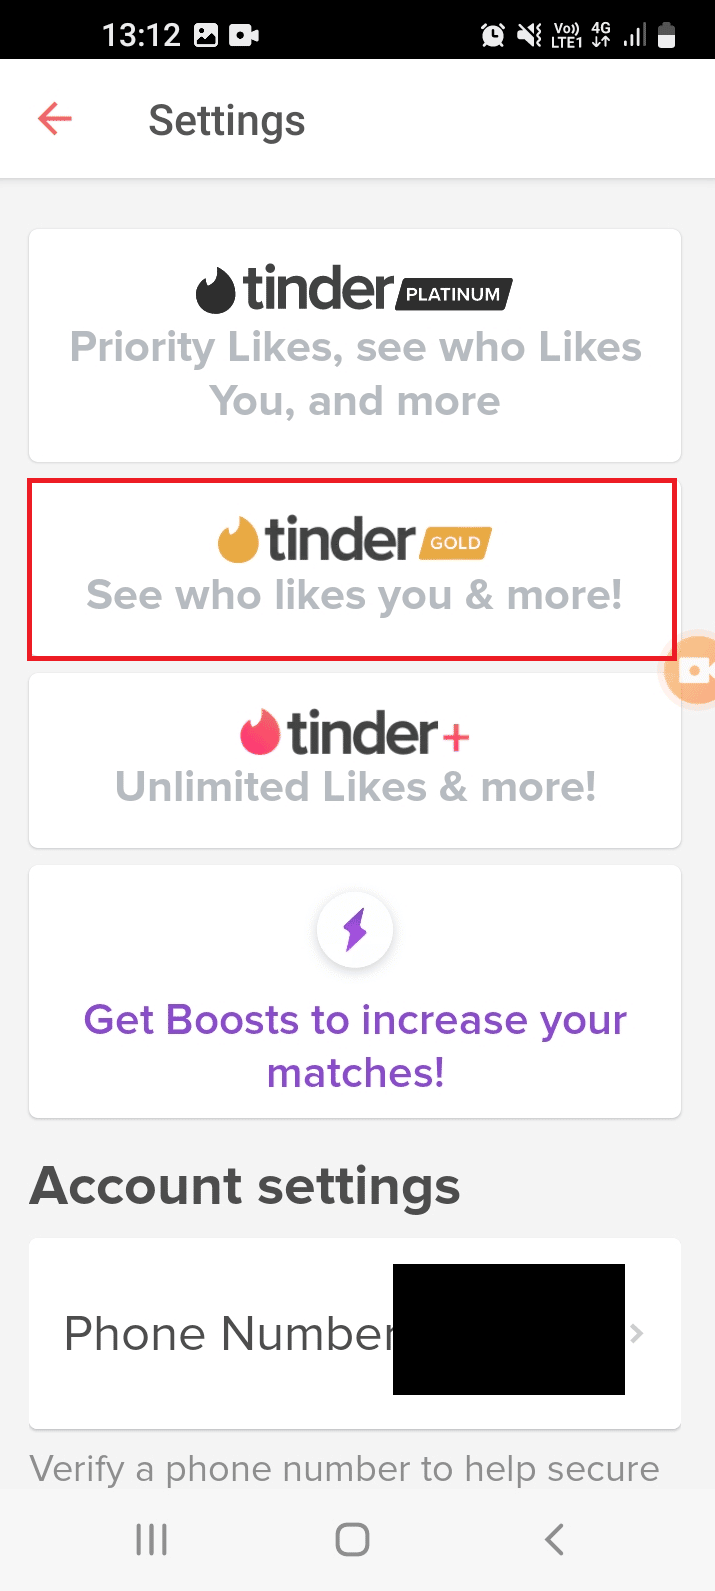 Tap on the tinder GOLD option